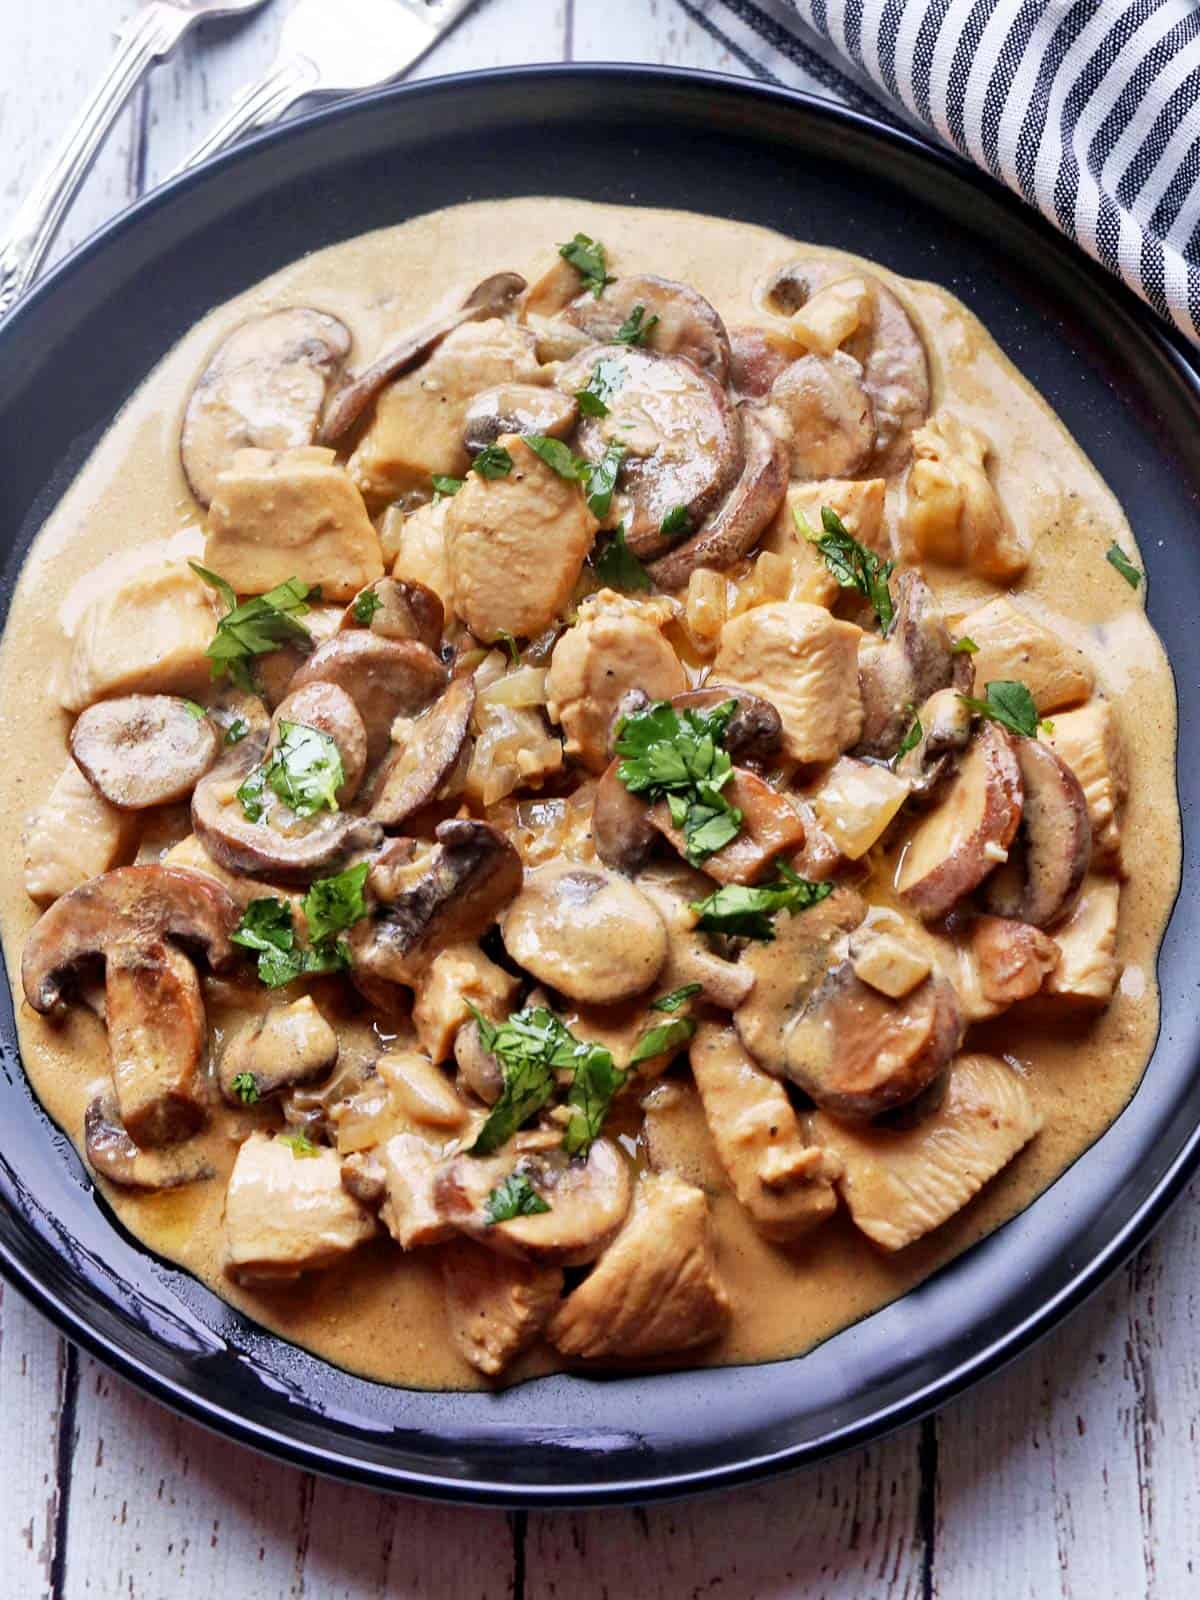 Chicken Stroganoff is served on a black plate with a napkin.